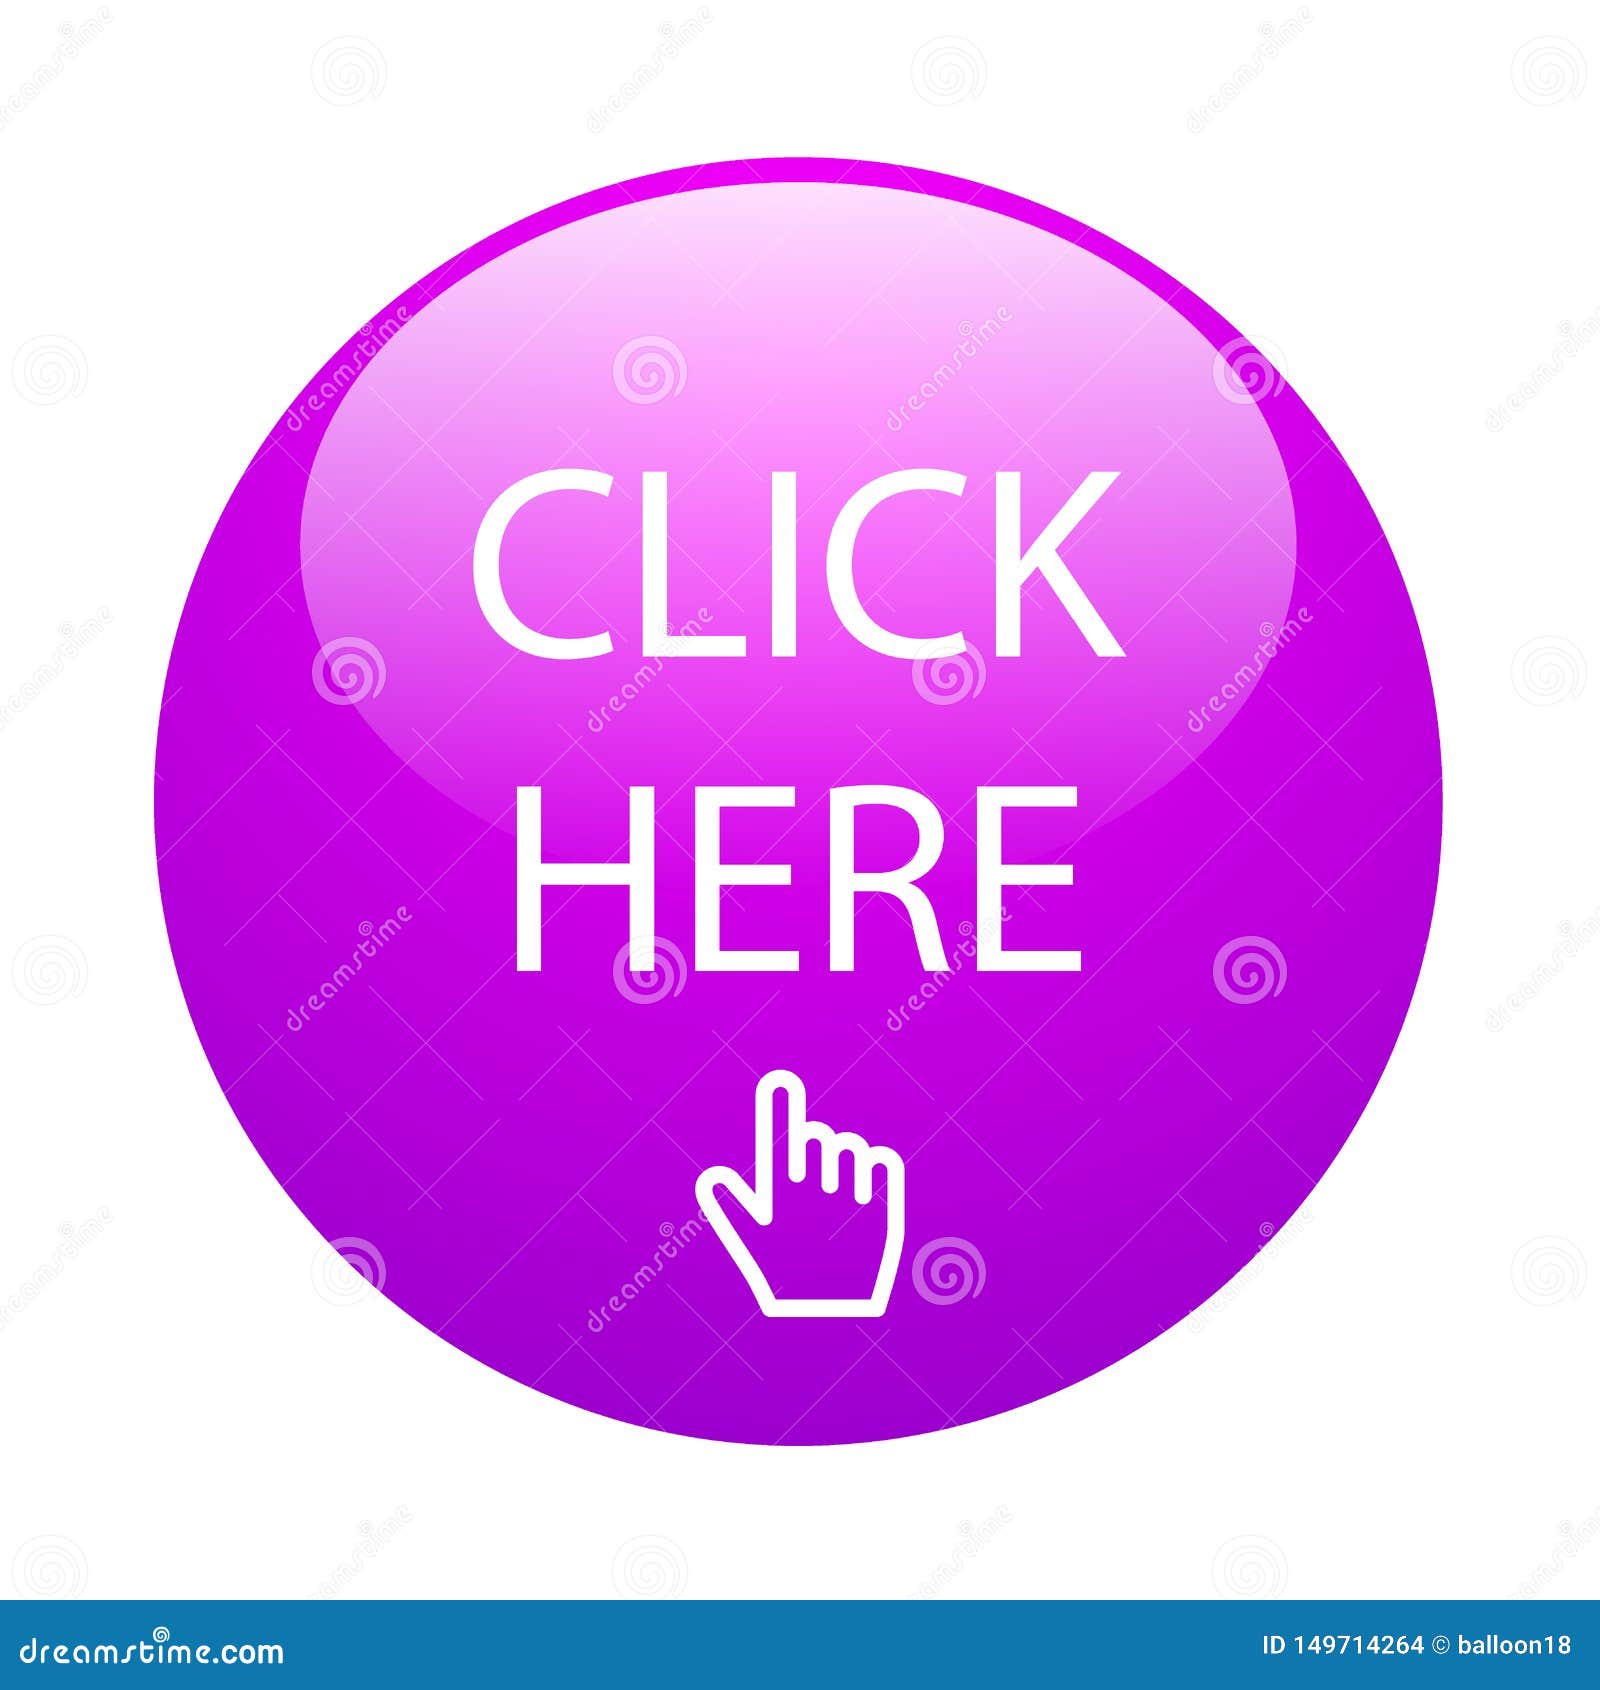 Click here button stock vector. Illustration of element - 149714264